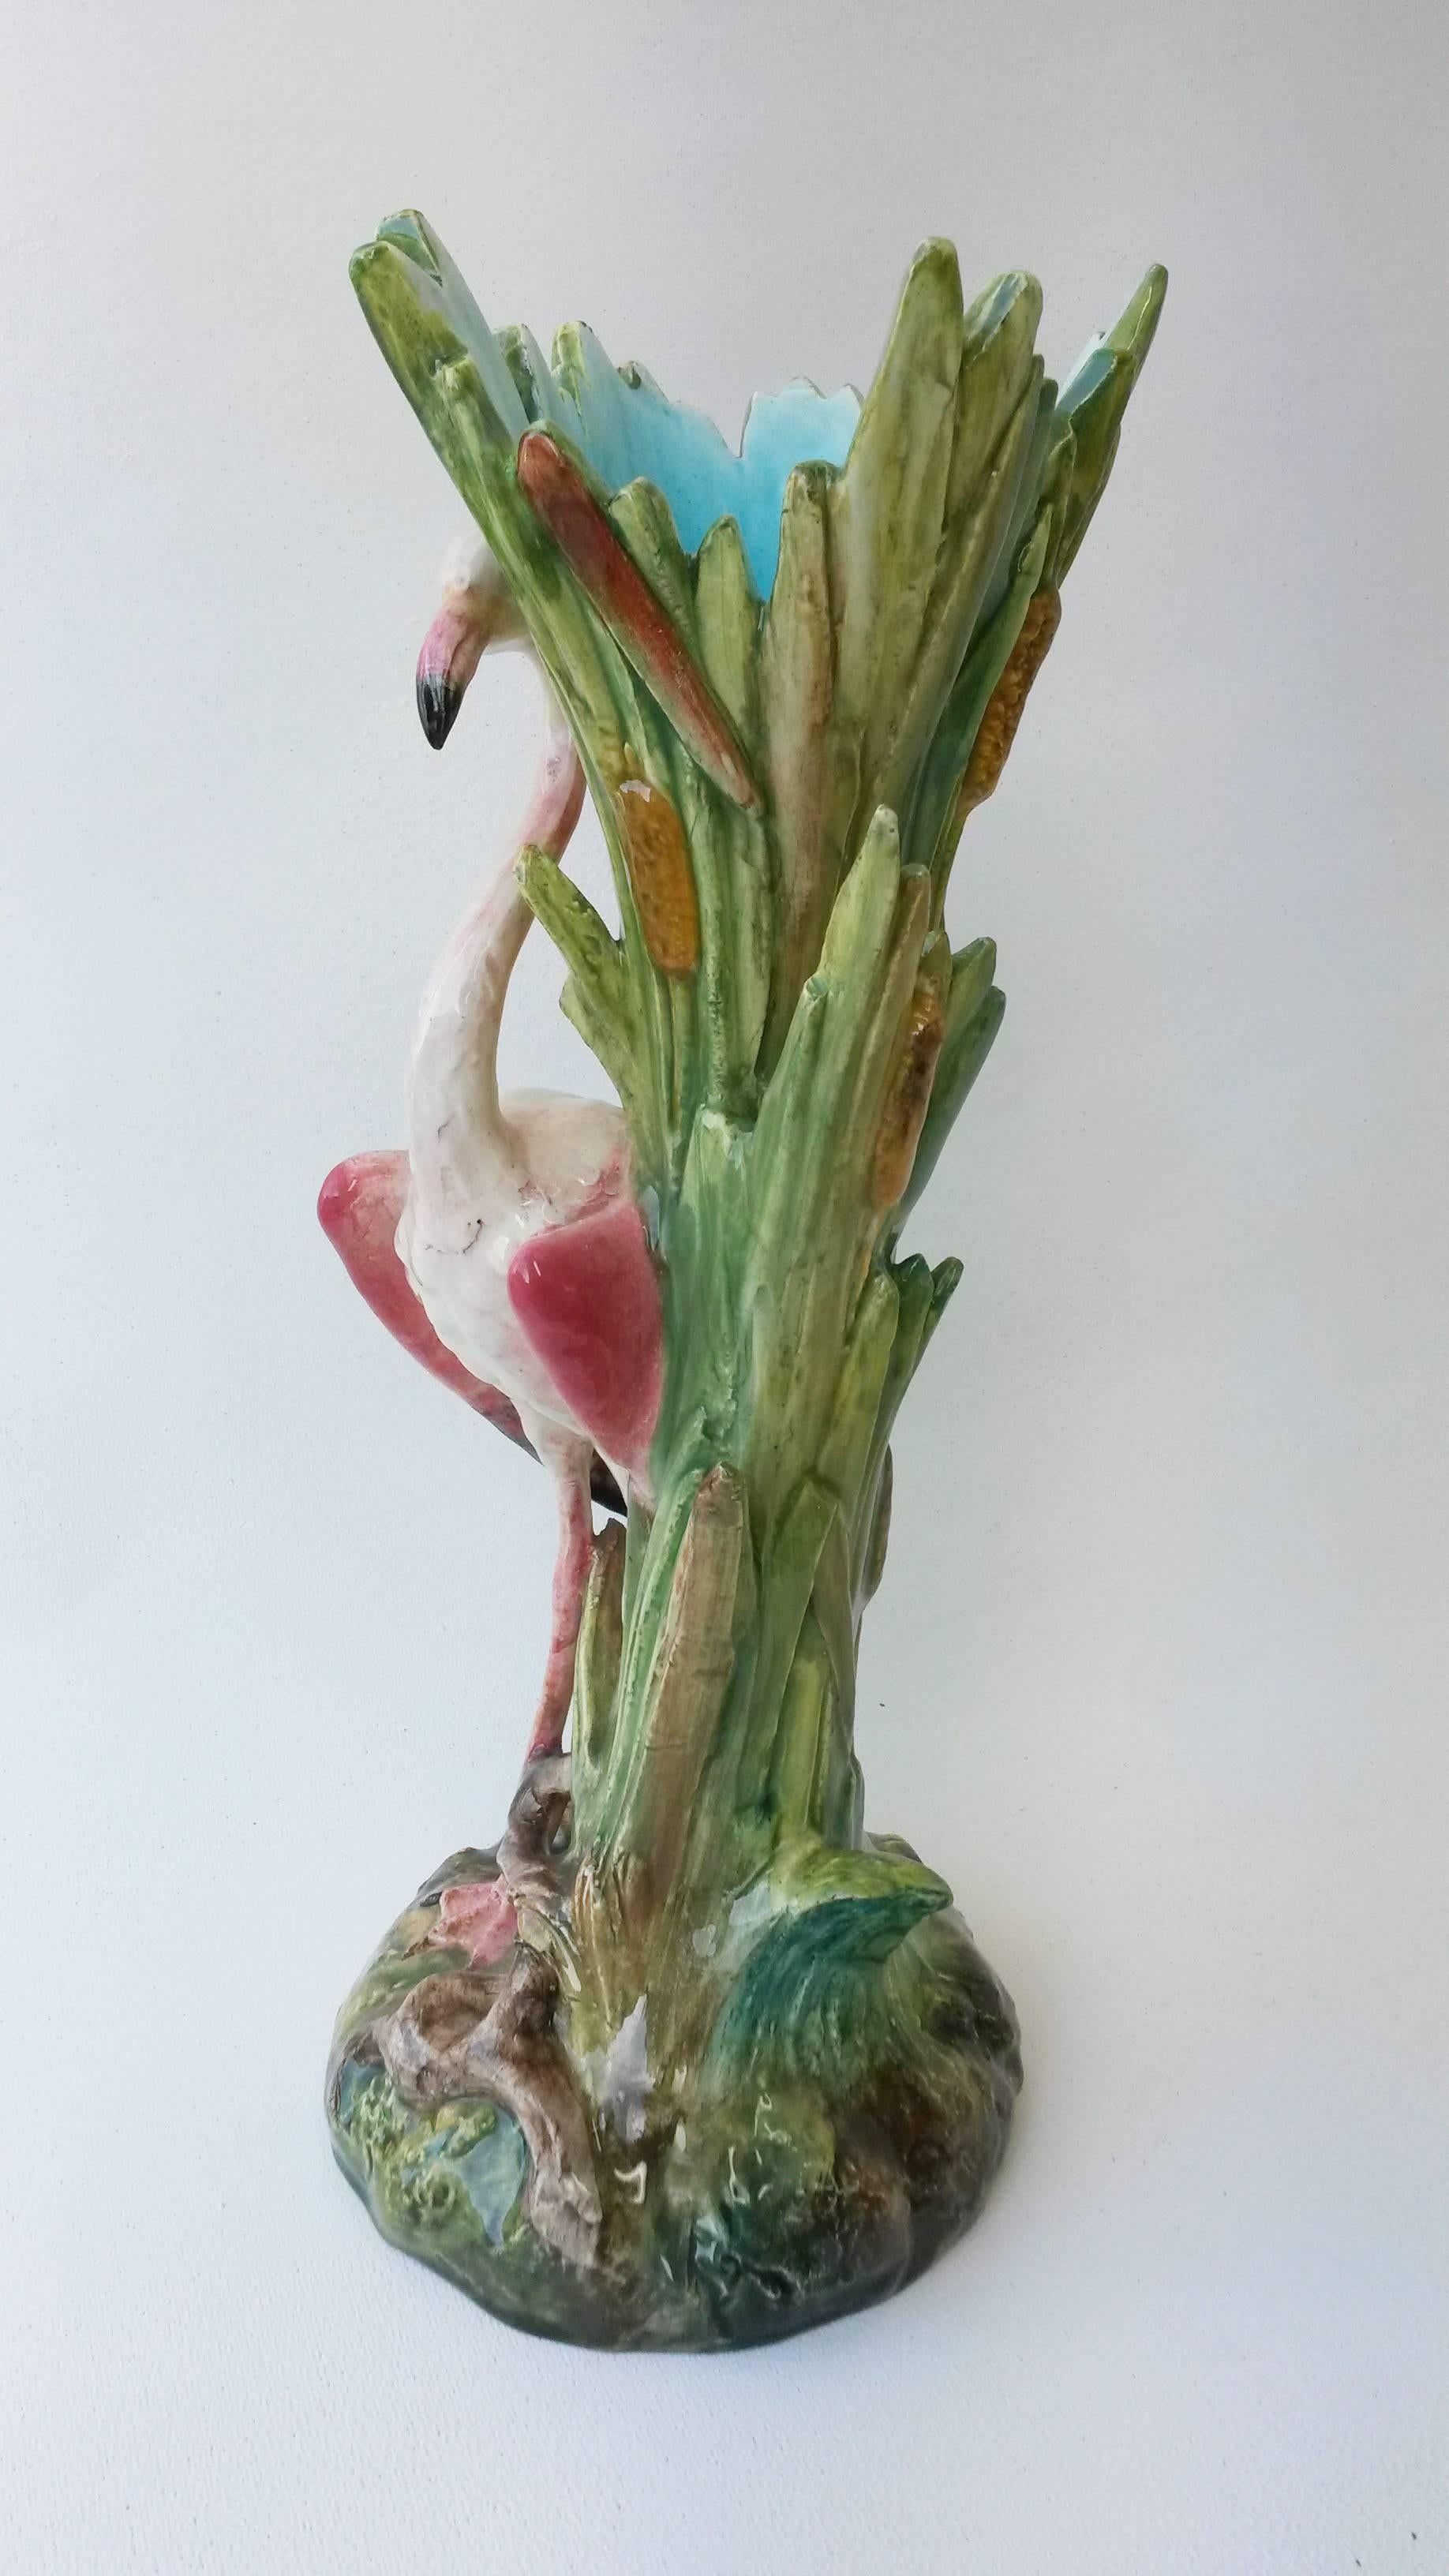 Elegant Majolica vase with a flamingo in front of leaves vase signed Delphin Massier, circa 1890.
The Massier are known for the quality of their unique enamels and paintings. The Massier family excelled in the representation of all animals at the